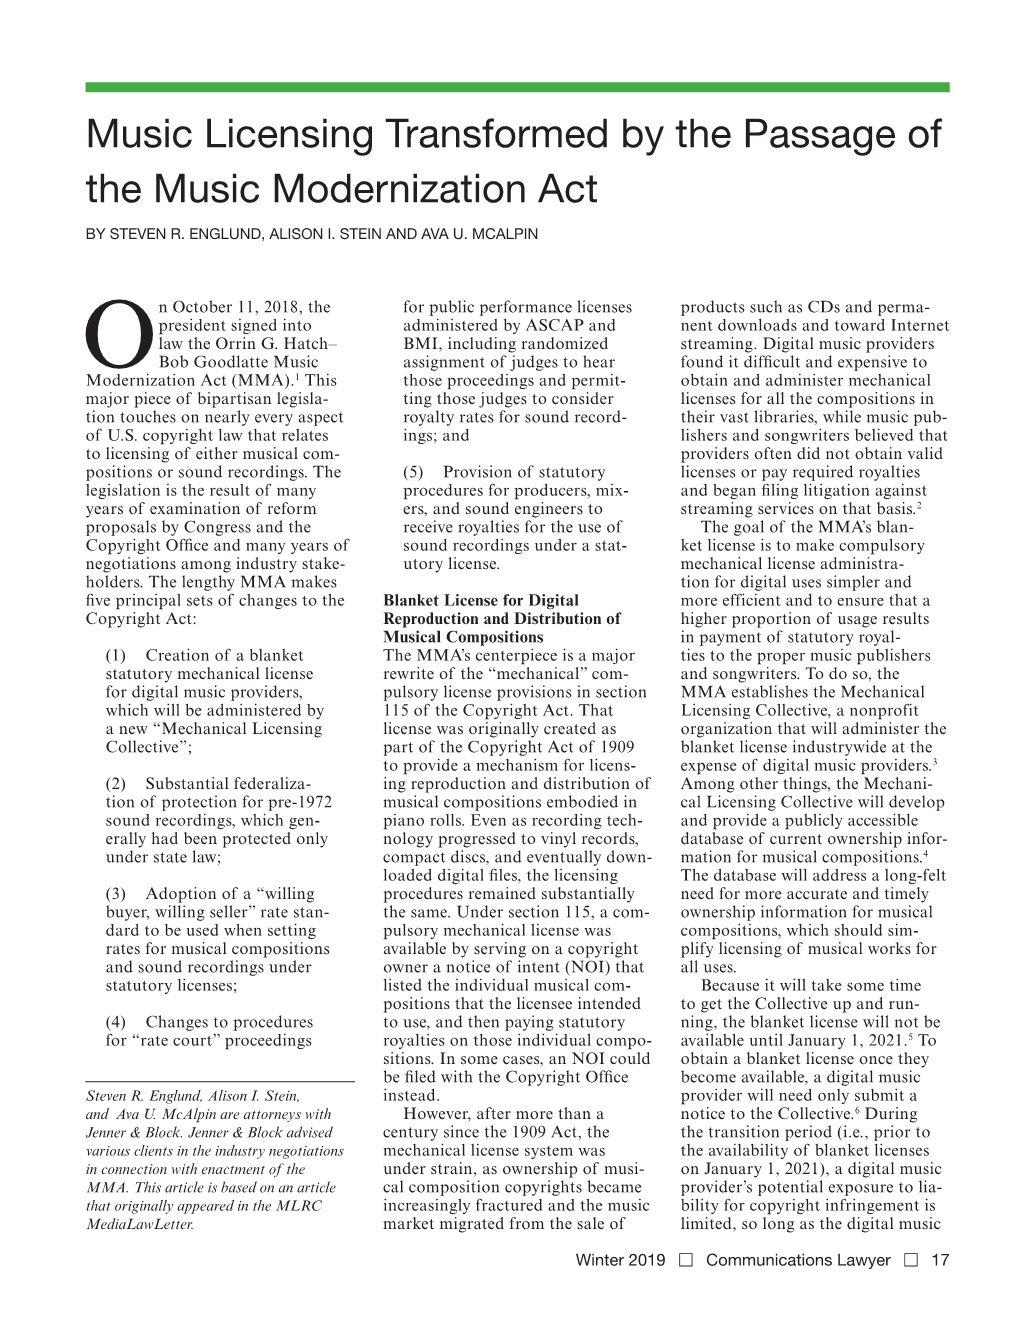 Music Licensing Transformed by the Passage of the Music Modernization Act